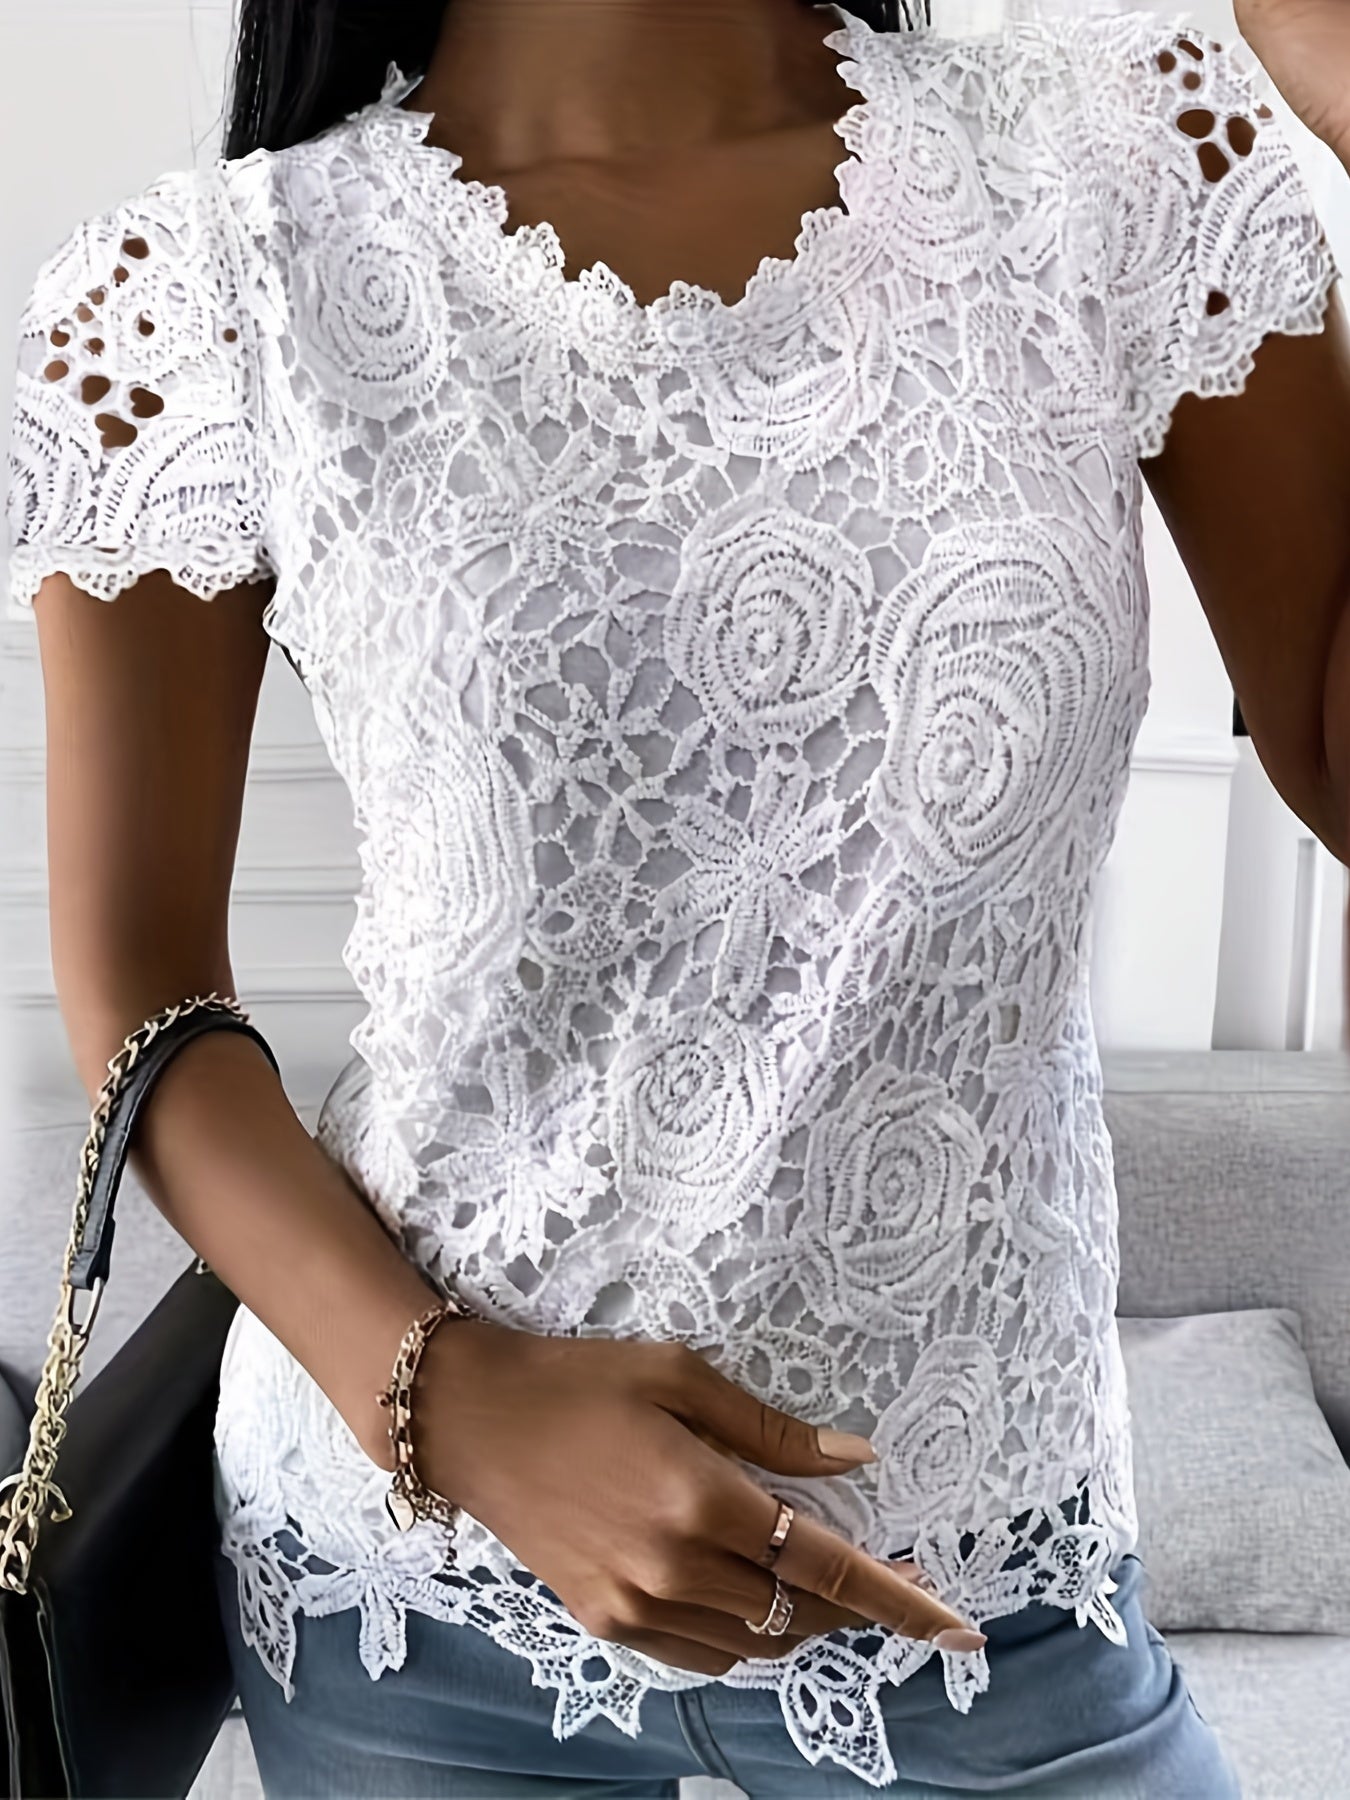 Women's Elegant Lace Crew Neck Short Sleeve T-Shirt - Stylish and Comfortable Top for Any Occasion